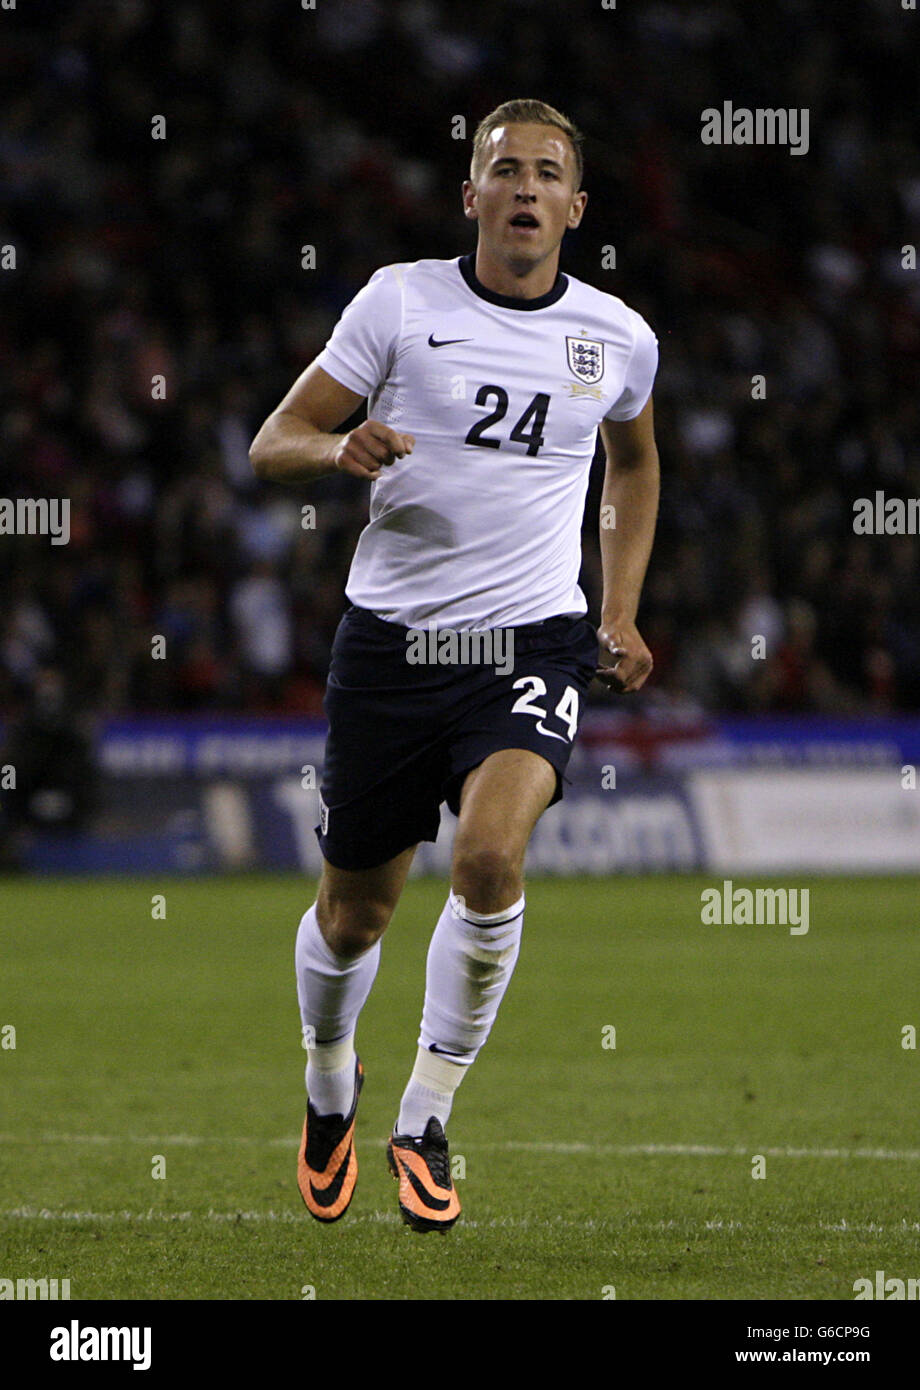 England's Harry Kane during the International Friendly match at Bramall Lane, Sheffield. PRESS ASSOCIATION Photo. Picture date: Monday August 12, 2013. See PA story SOCCER England Under 21. Photo credit should read: Simon Cooper/PA Wire. Stock Photo